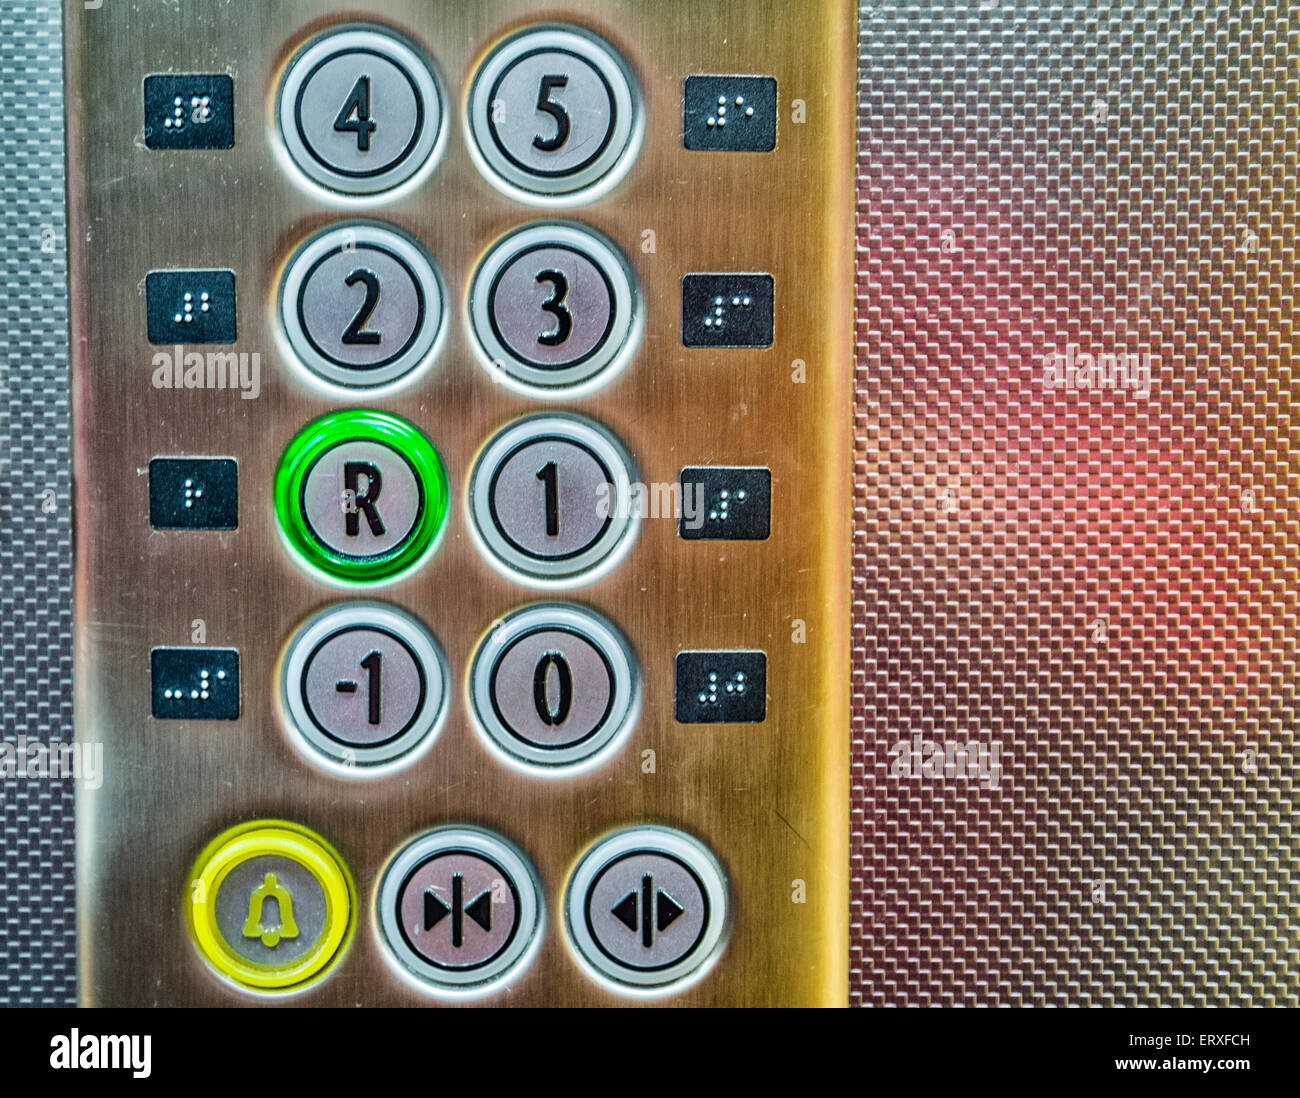 Buttons in an elevator: what floor are you? Stock Photo